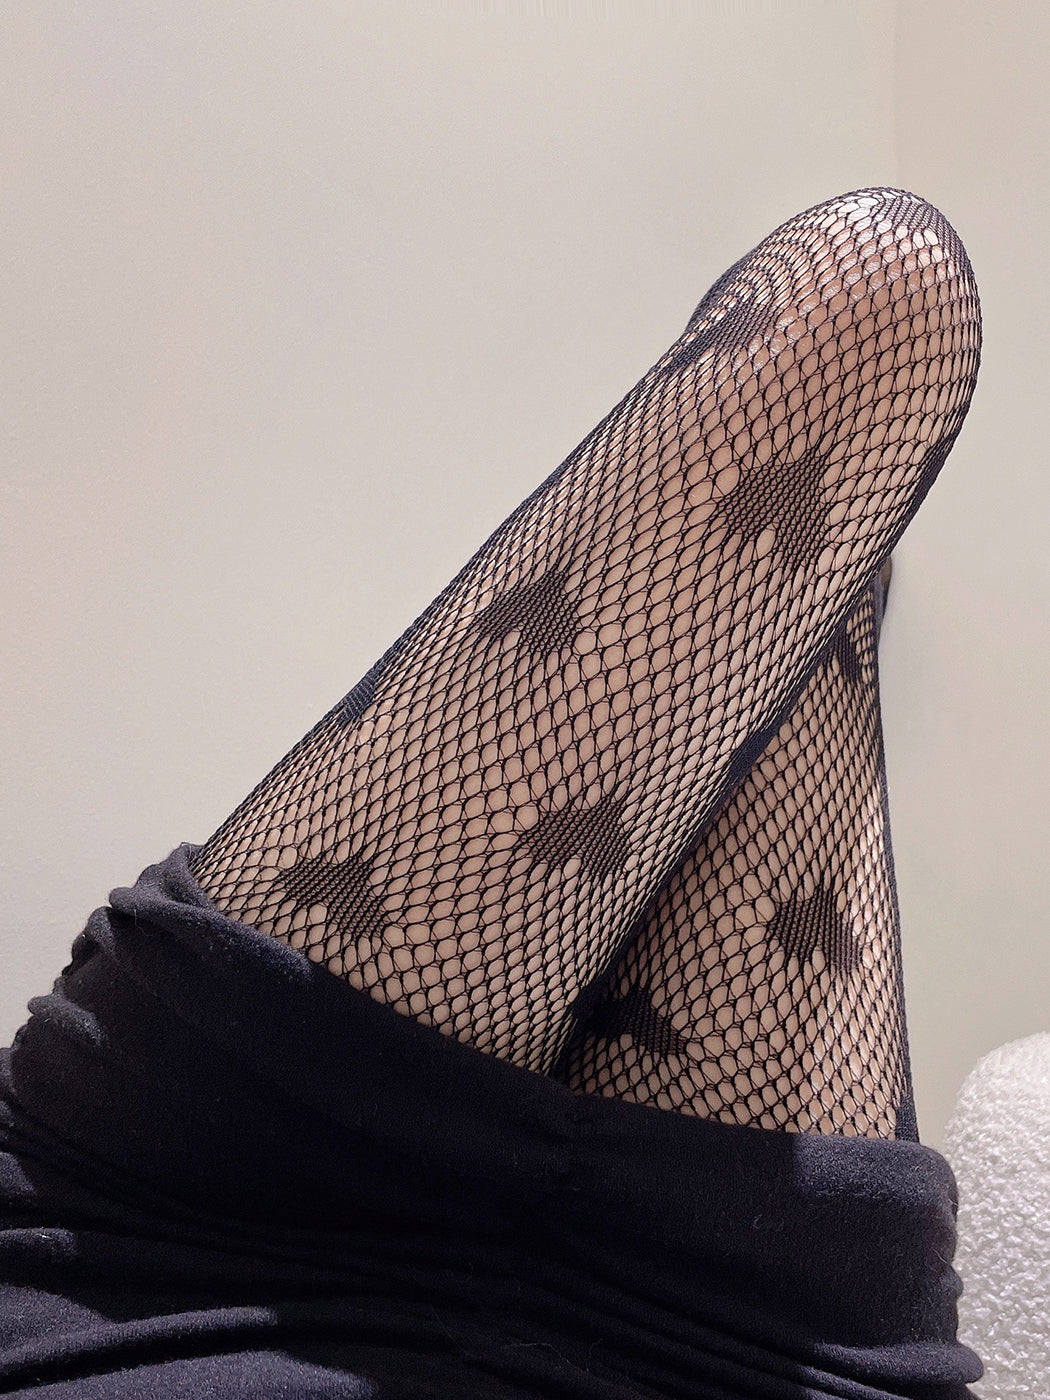 Black Heart Patterned Fishnet Tights High Waist Pantyhose Stockings